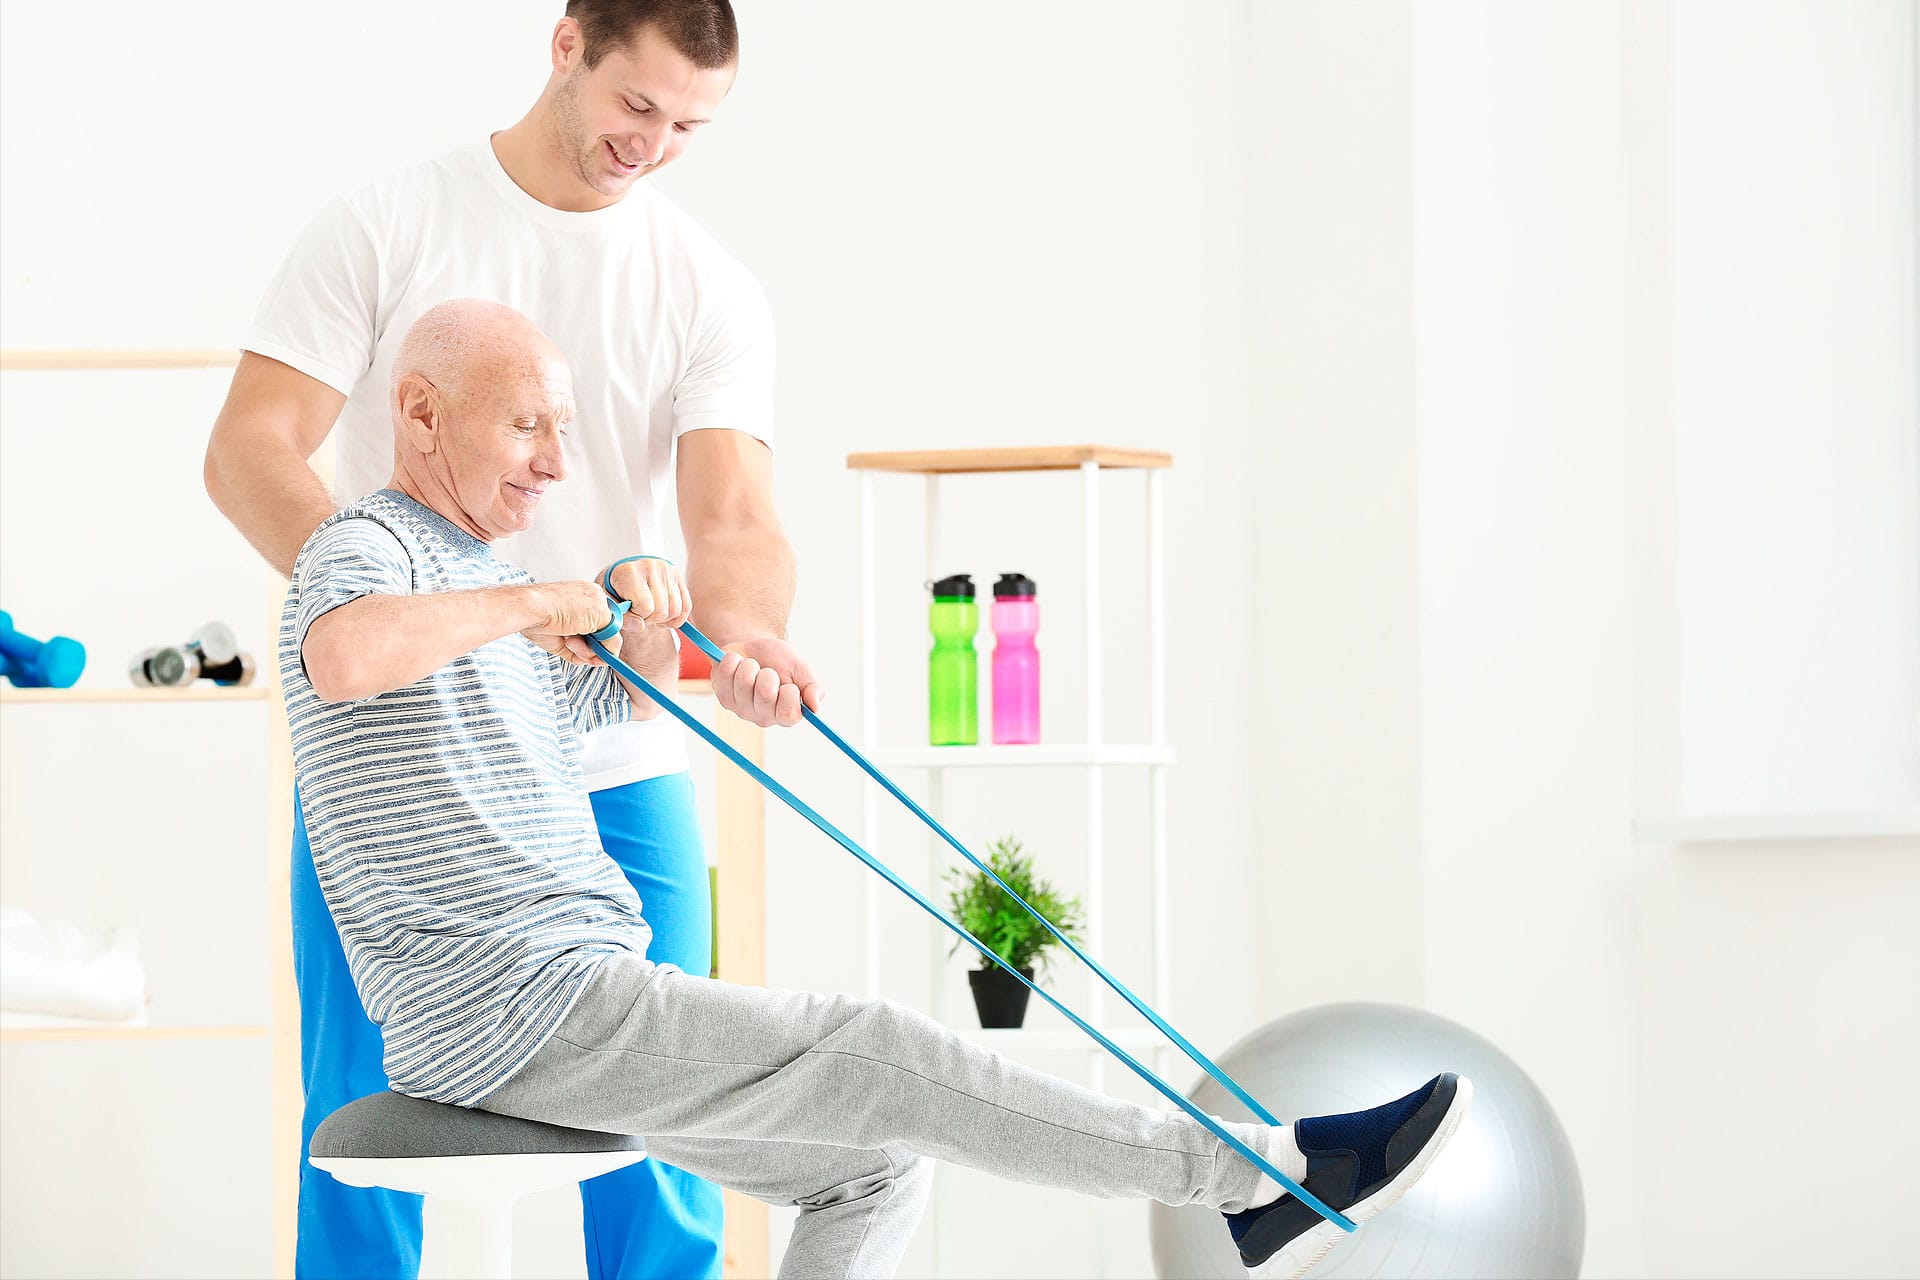 Physical Therapy Rehabilitation Solutions Market: Meeting Growing Demand for Rehabilitation Services